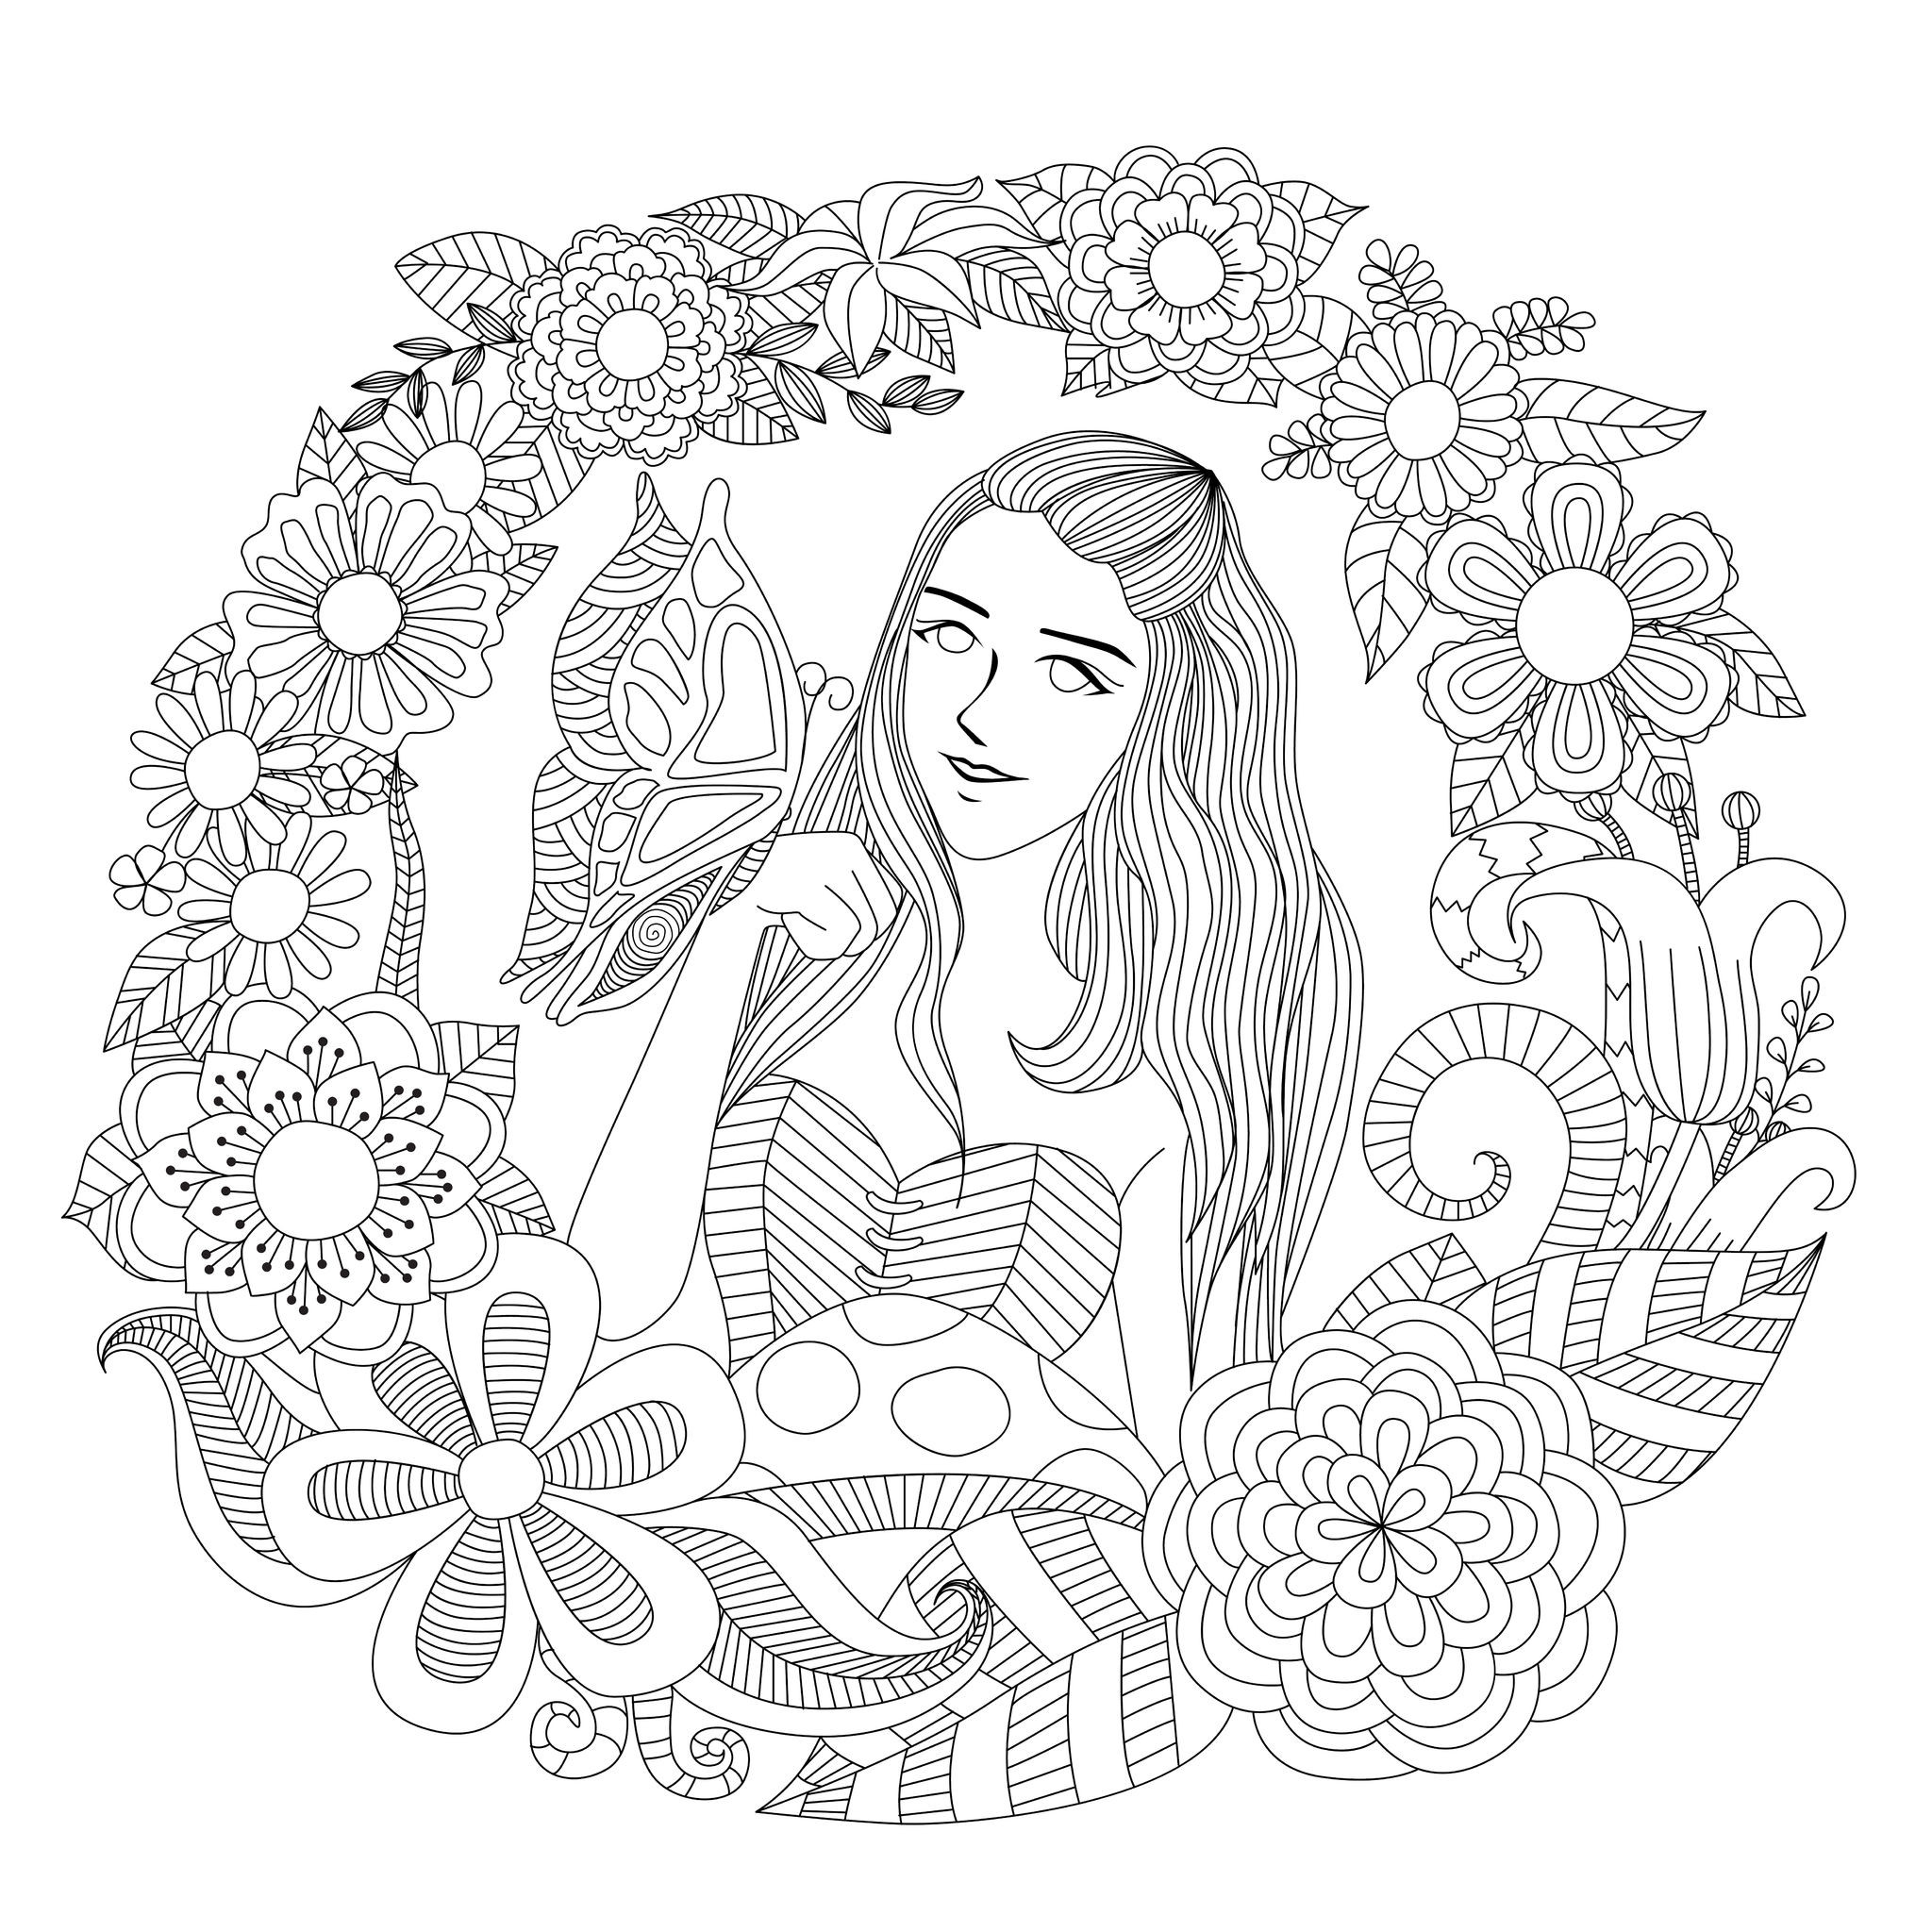 Coloring Pages Of Girls For Adults
 Butterfly girl Anti stress Adult Coloring Pages